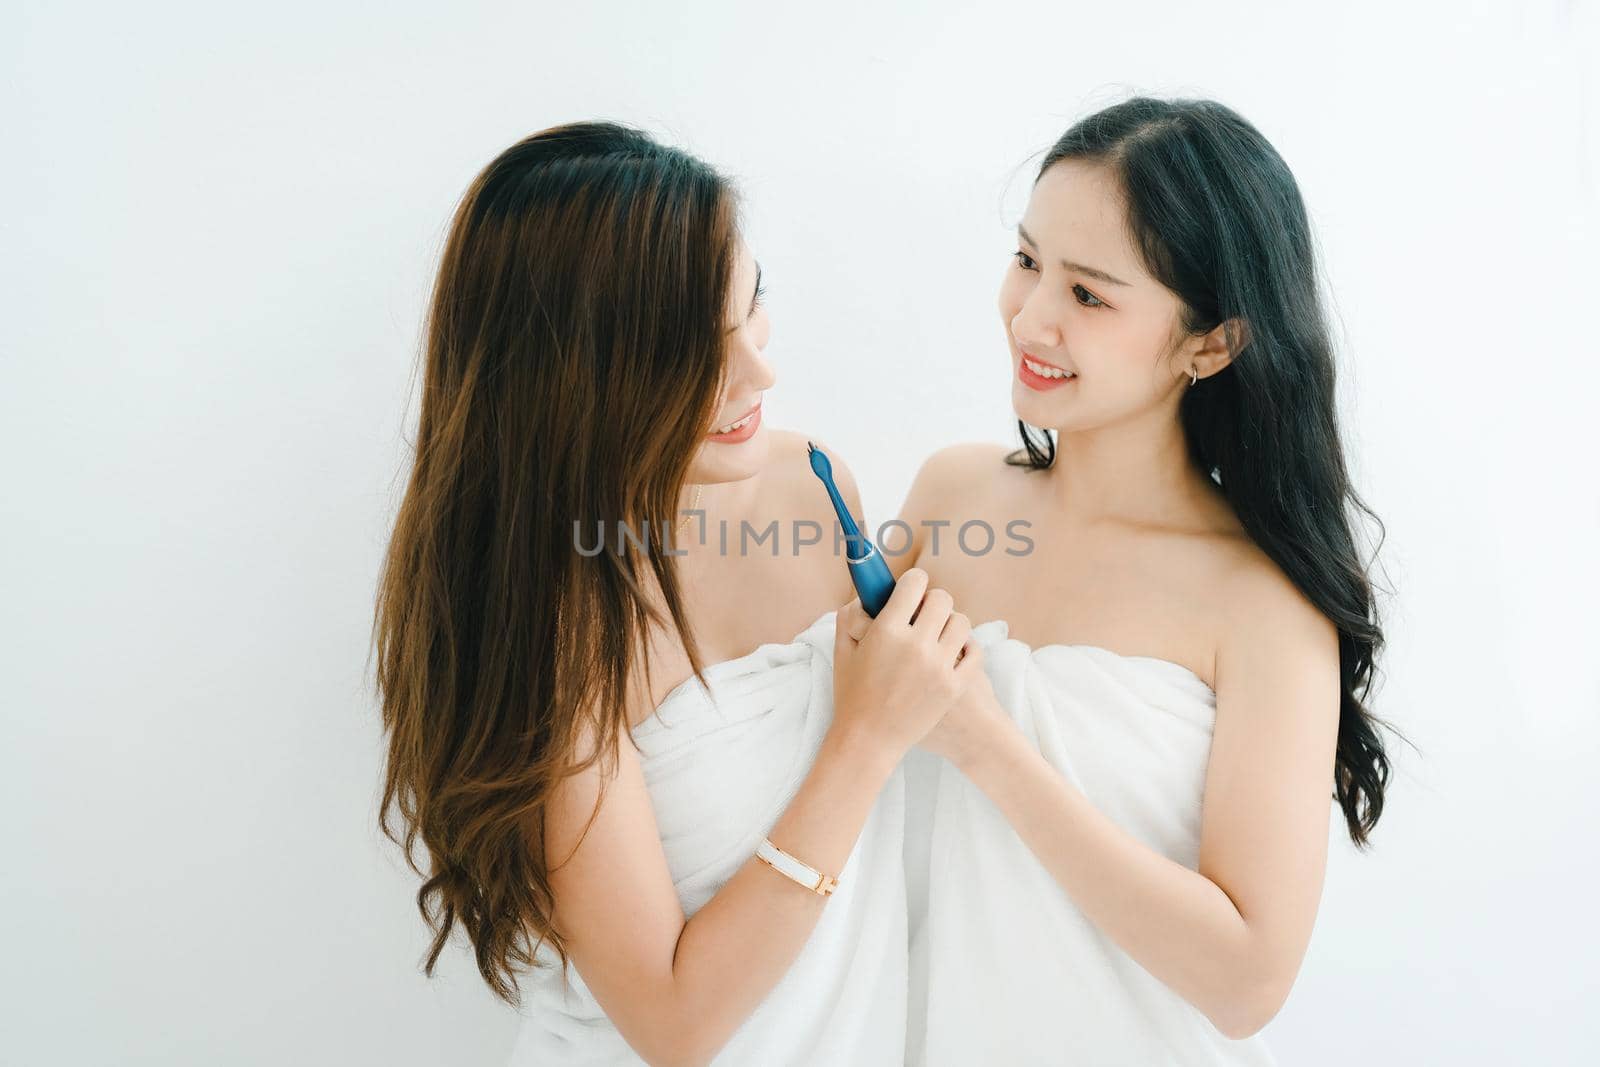 lgbtq, lgbt concept, homosexuality, portrait of two asian women posing happy together and showing love for each other while brushing teeth.